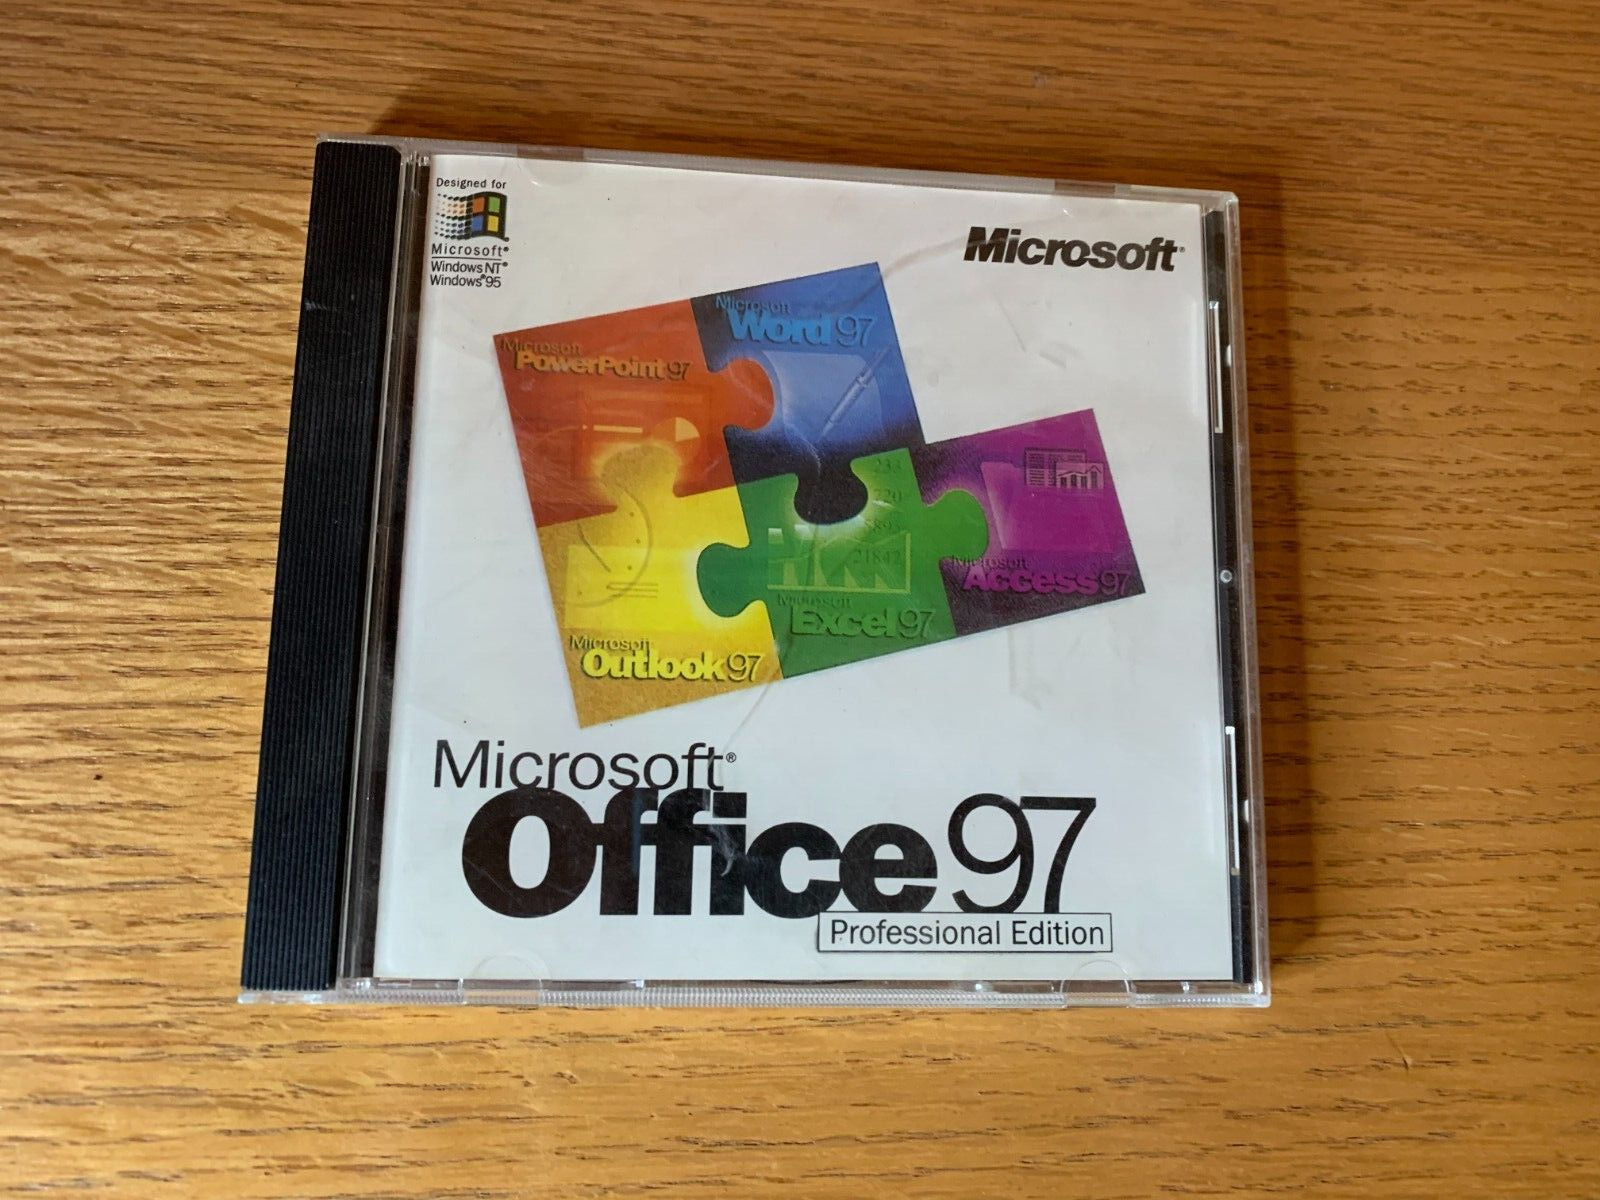 MICROSOFT OFFICE 97 PROFESSIONAL EDITION 90844 X03-44544 with Product Key